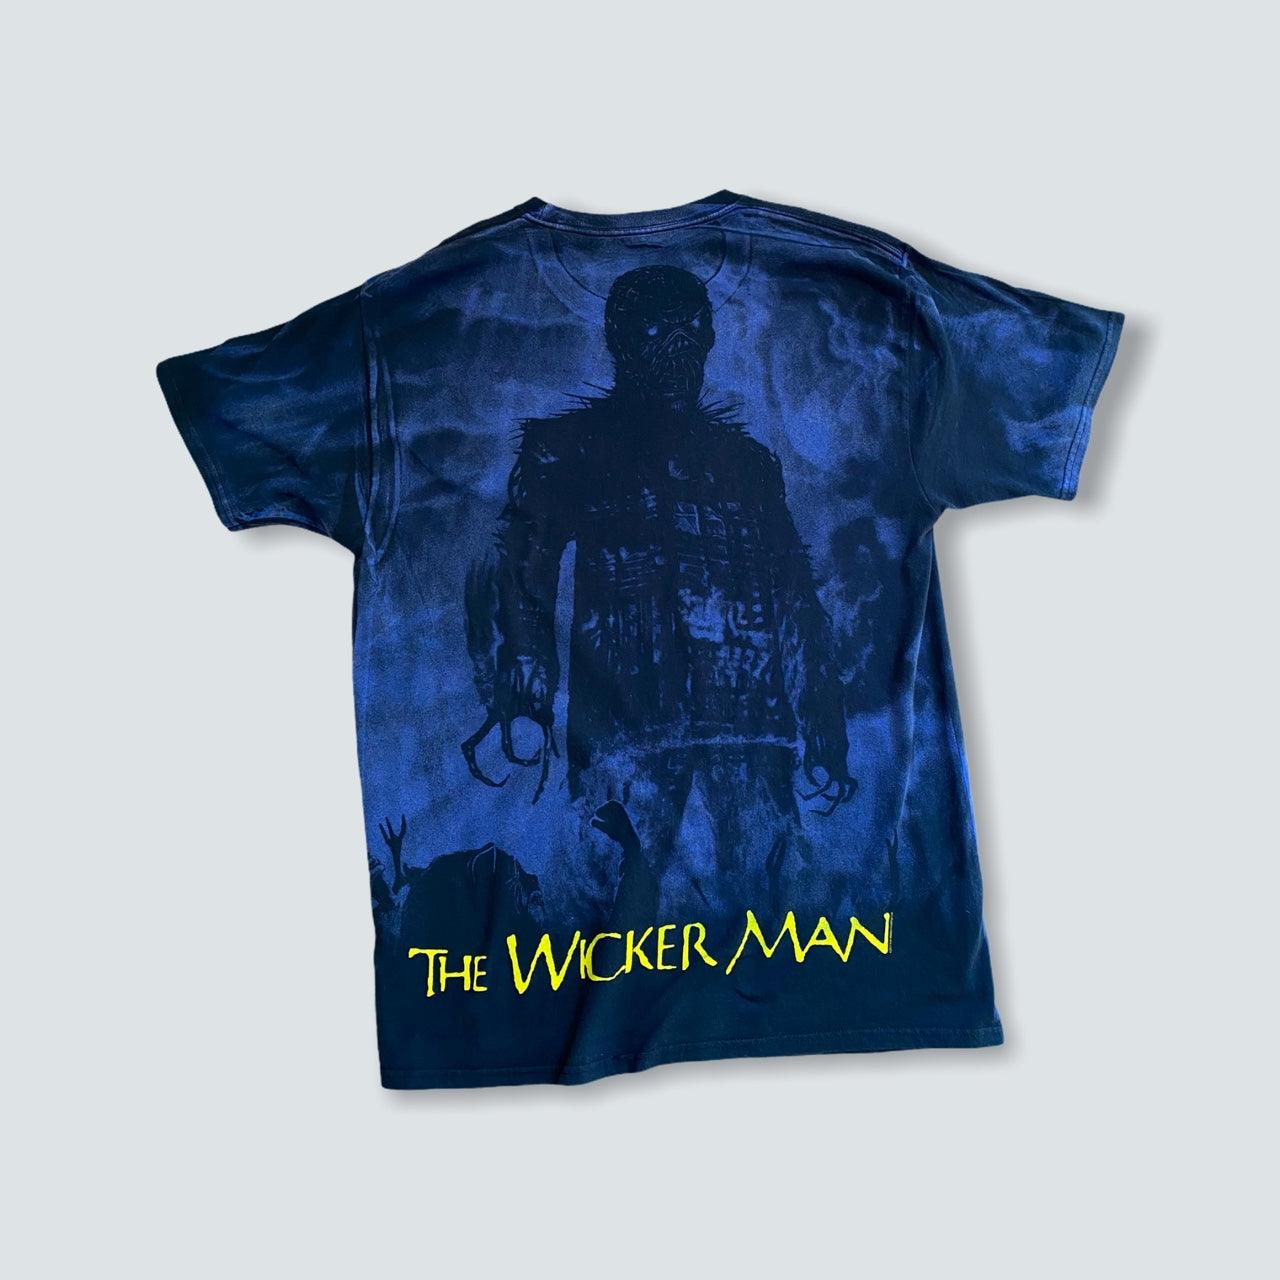 Iron maiden Band tee “The Wicker Man” (L) - Known Source